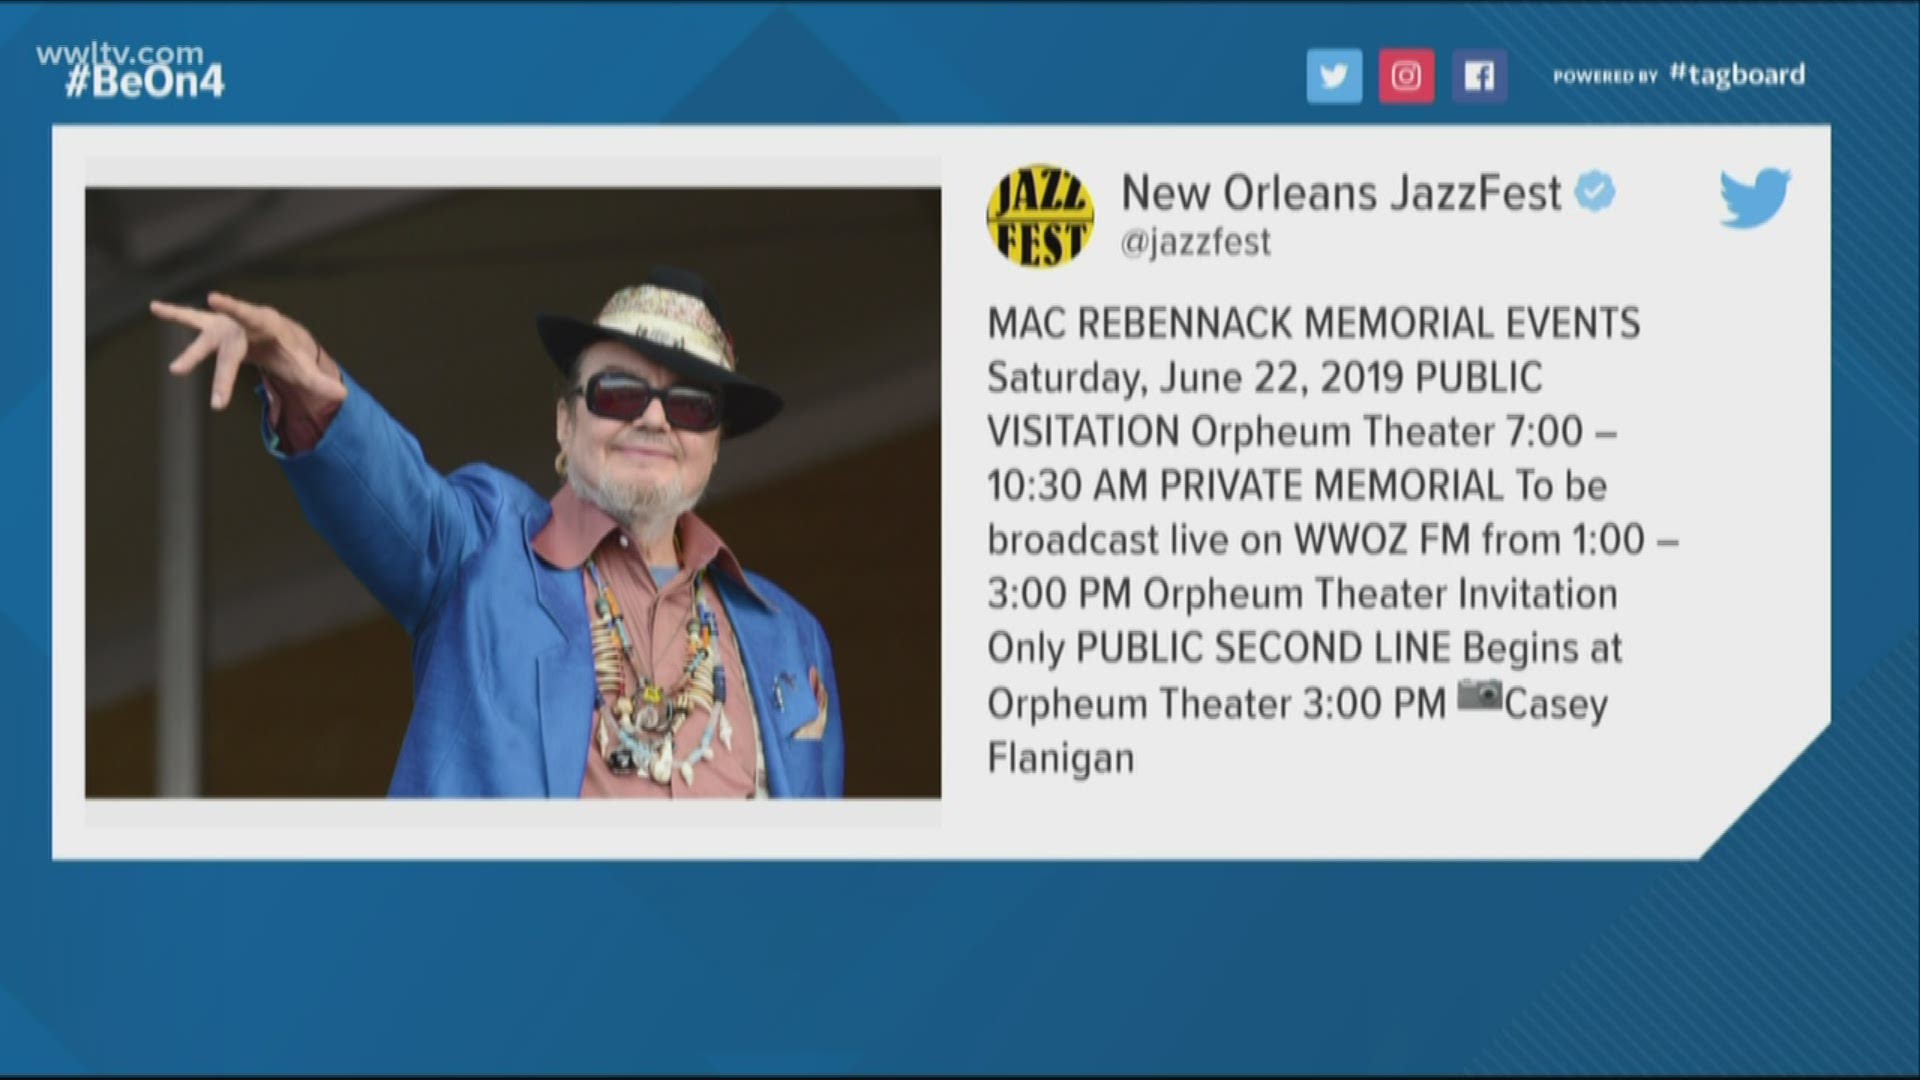 Saturday will be an opportunity for fans of the New Orleans-based Rock 'N Roll Hall of Famer to say their final goodbyes.